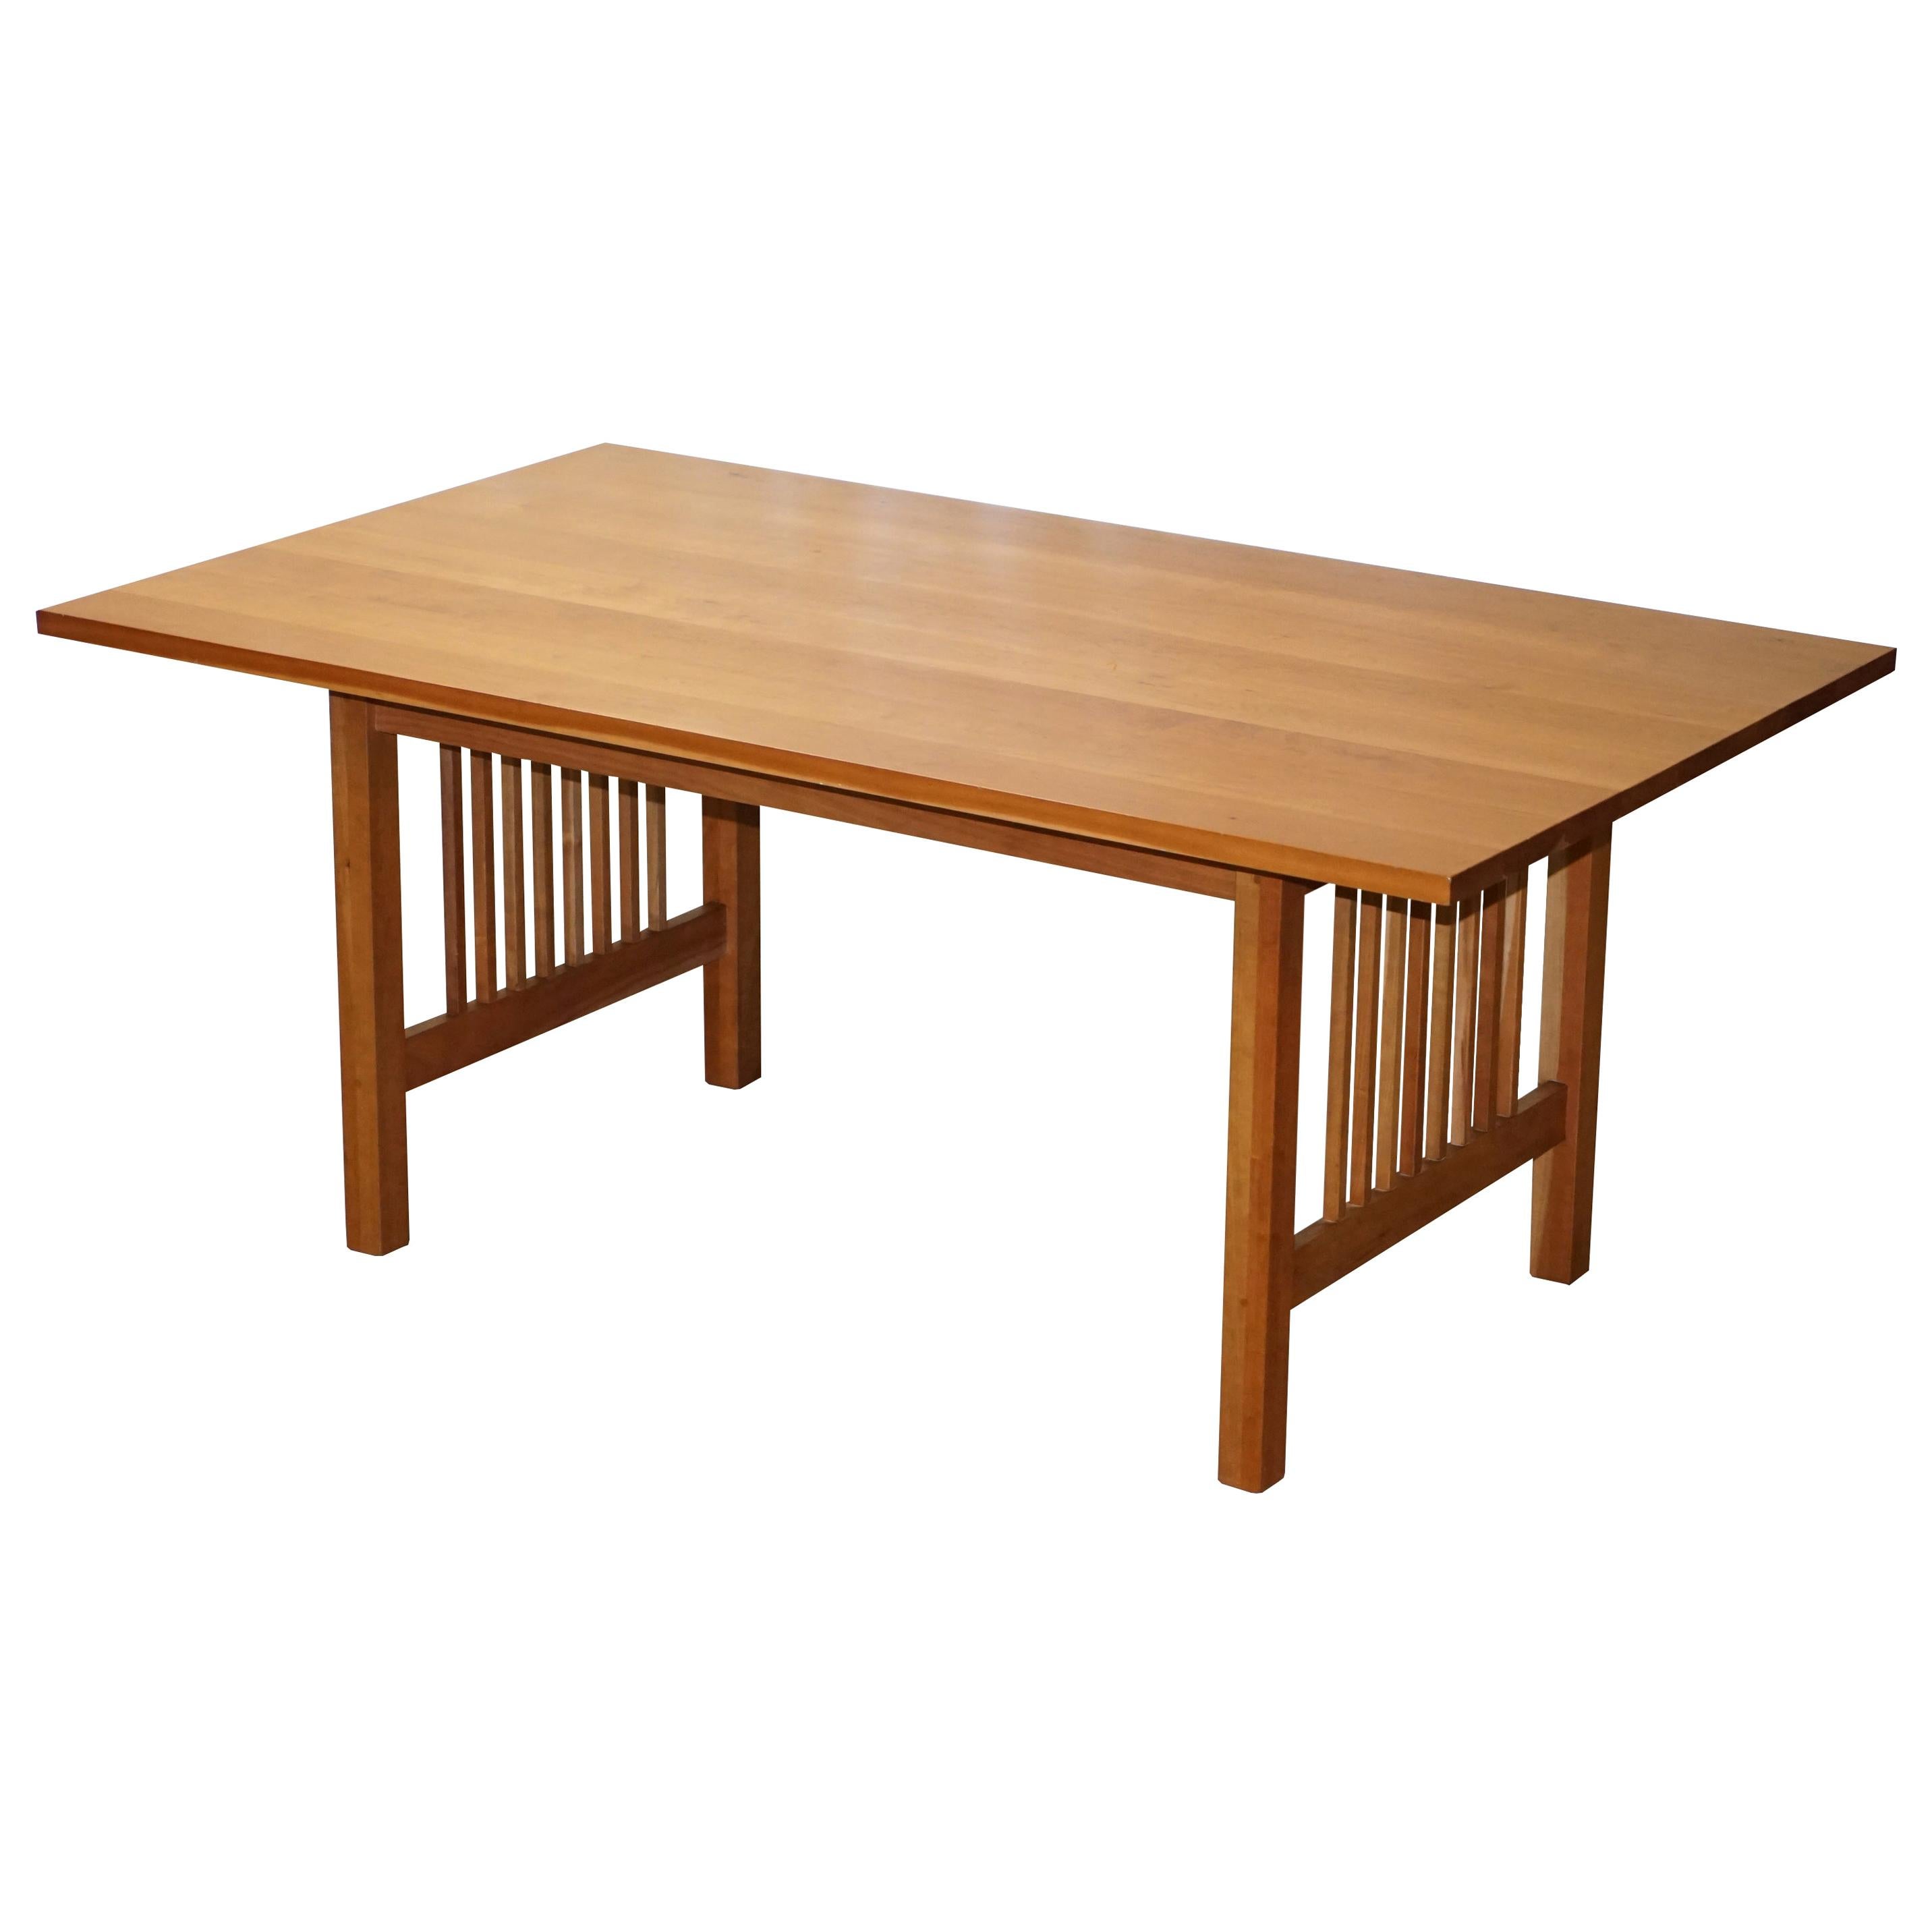 RIVA 1920 MADE IN ITALY SOLID AMERICAN BLACK CHERRY WOOD REFECTORY DINING TABLe